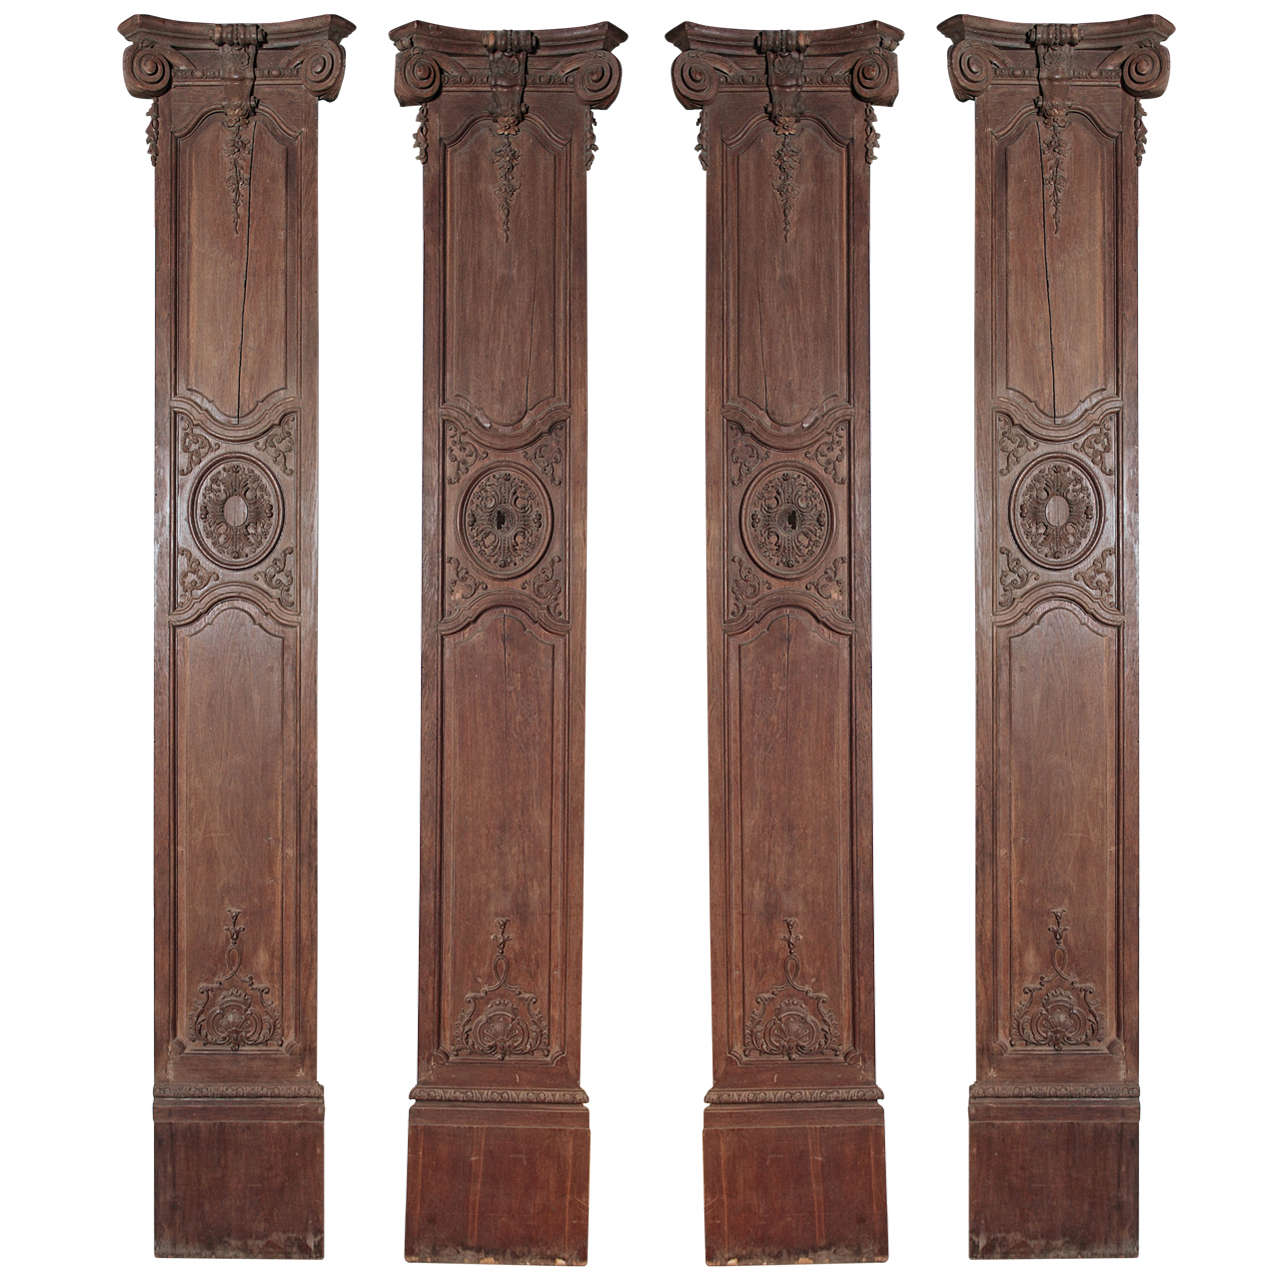 Set of Four Antique Oak Columns from a French Boiserie or Paneled Room